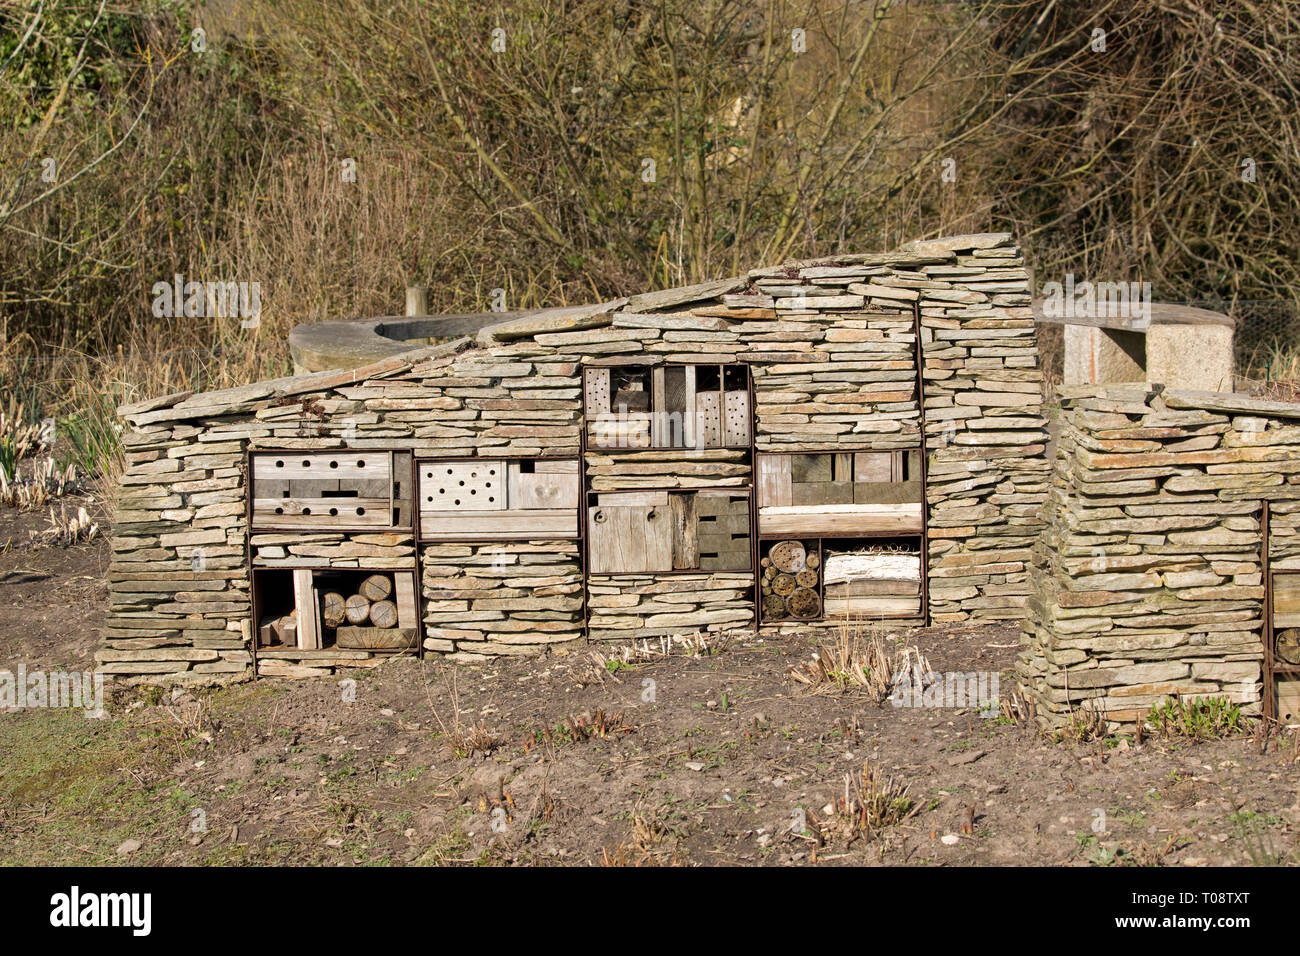 Insect or bug hotel built of dry stone walling with timber and log inserts to attract insects, especially bees, and protect pollinators at Wildfowl an Stock Photo